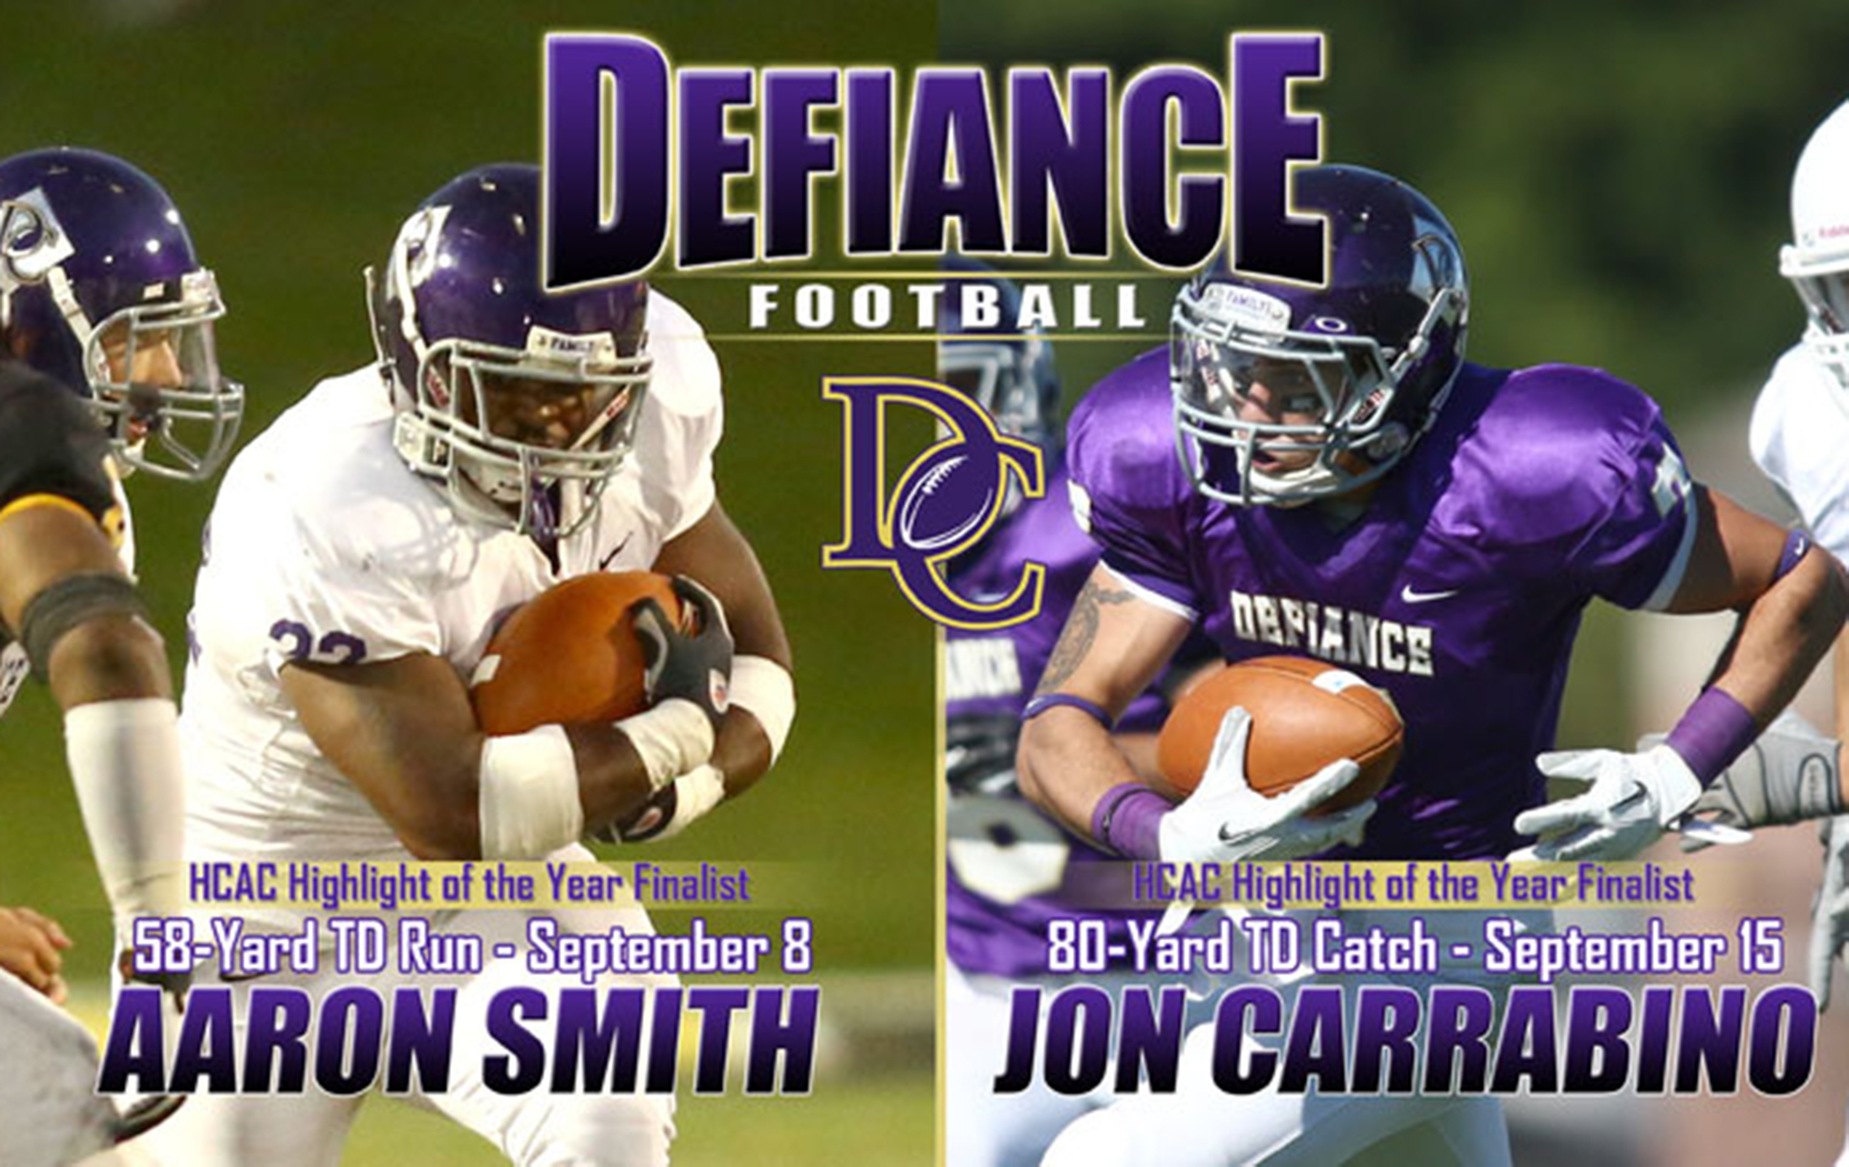 DC's Smith and Carrabino in Running for HCAC Play of the Year